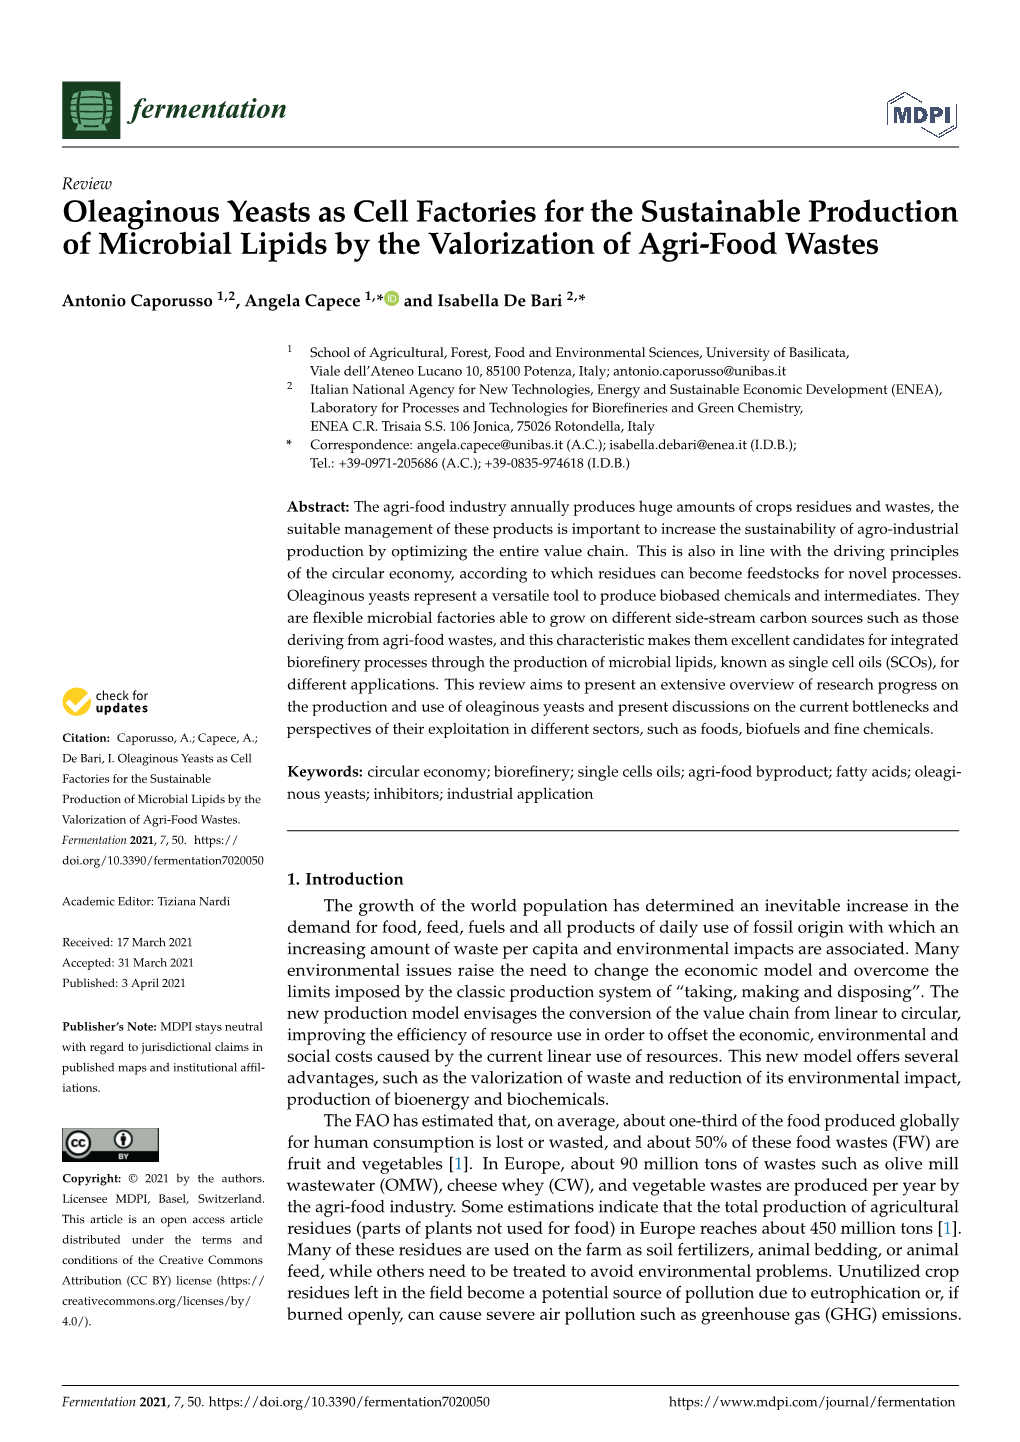 Oleaginous Yeasts As Cell Factories for the Sustainable Production of Microbial Lipids by the Valorization of Agri-Food Wastes